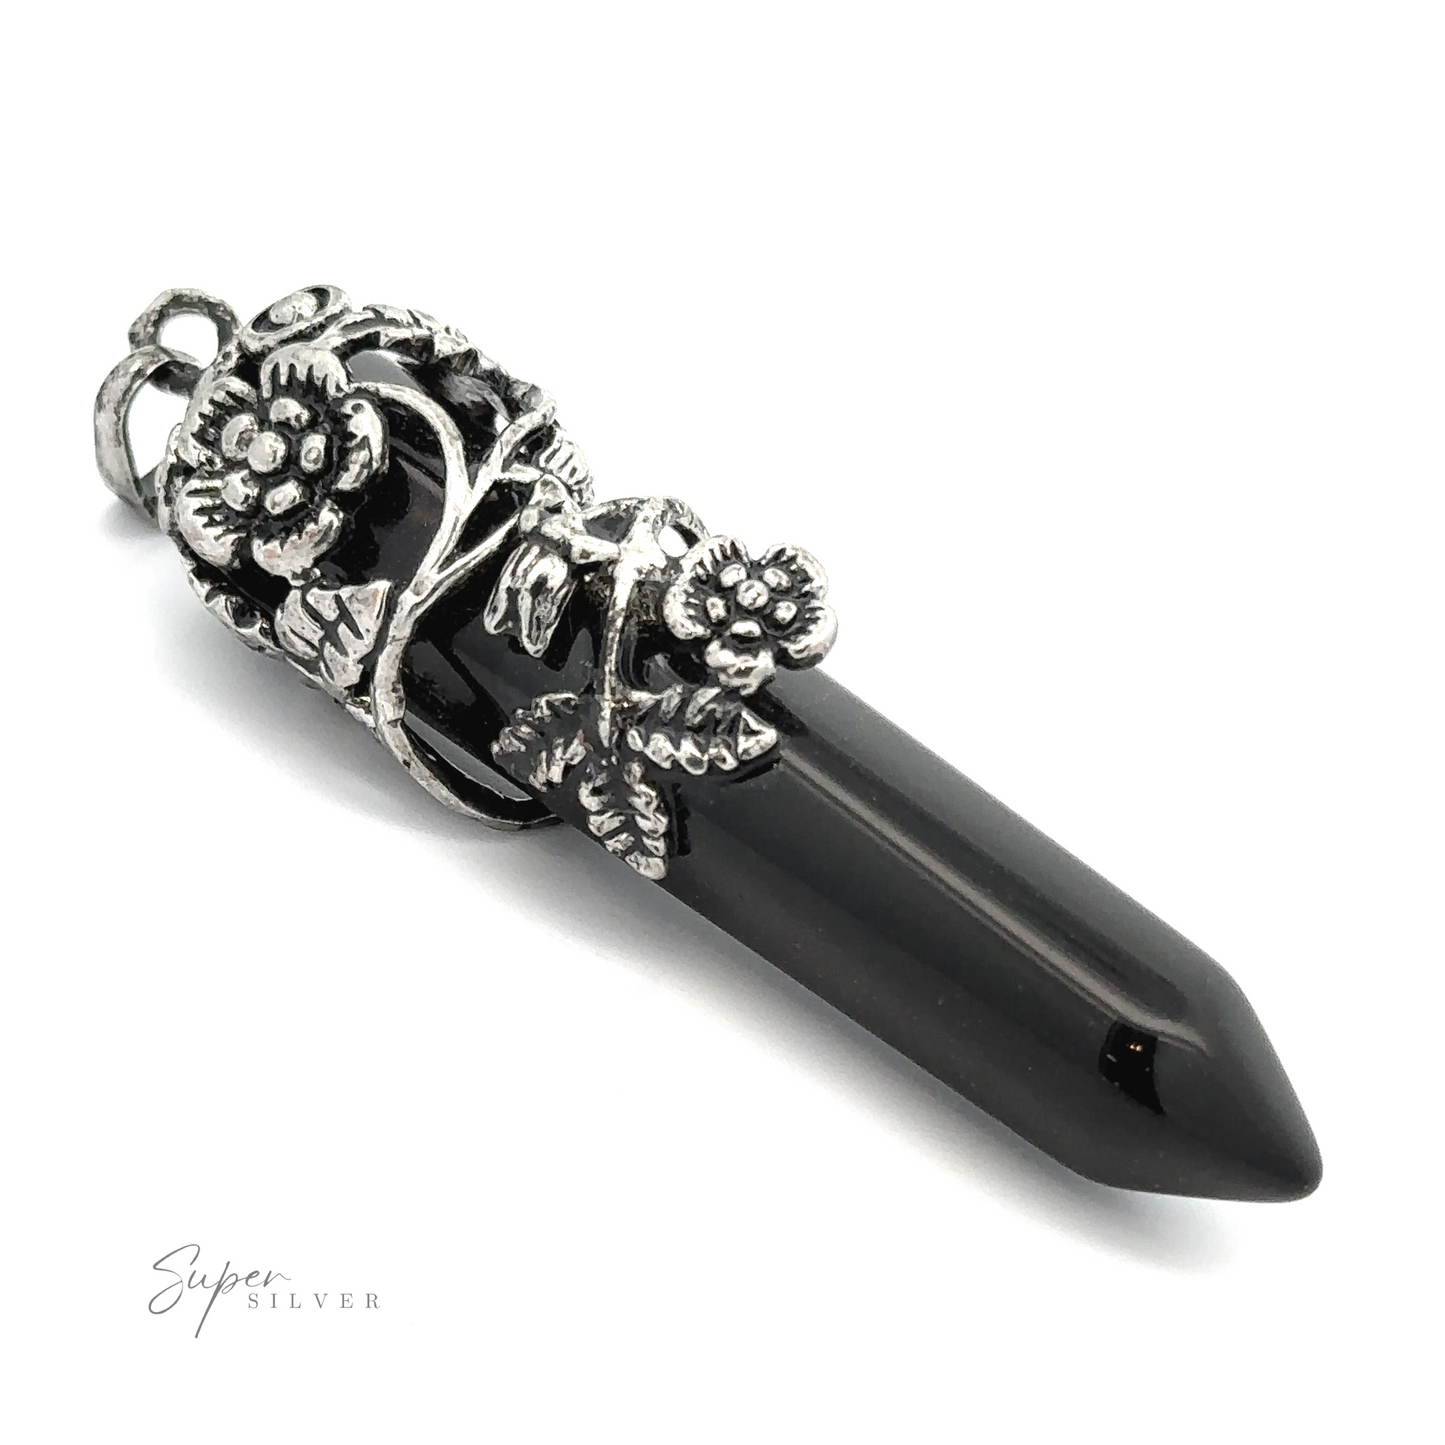 
                  
                    A black obelisk-shaped stone pendant with a pointed tip is encased in an ornate silver floral setting. The branding "Silver-Plated Flower Design Stone Pendant" is visible in the bottom left corner, showcasing exquisite craftsmanship and attention to detail.
                  
                